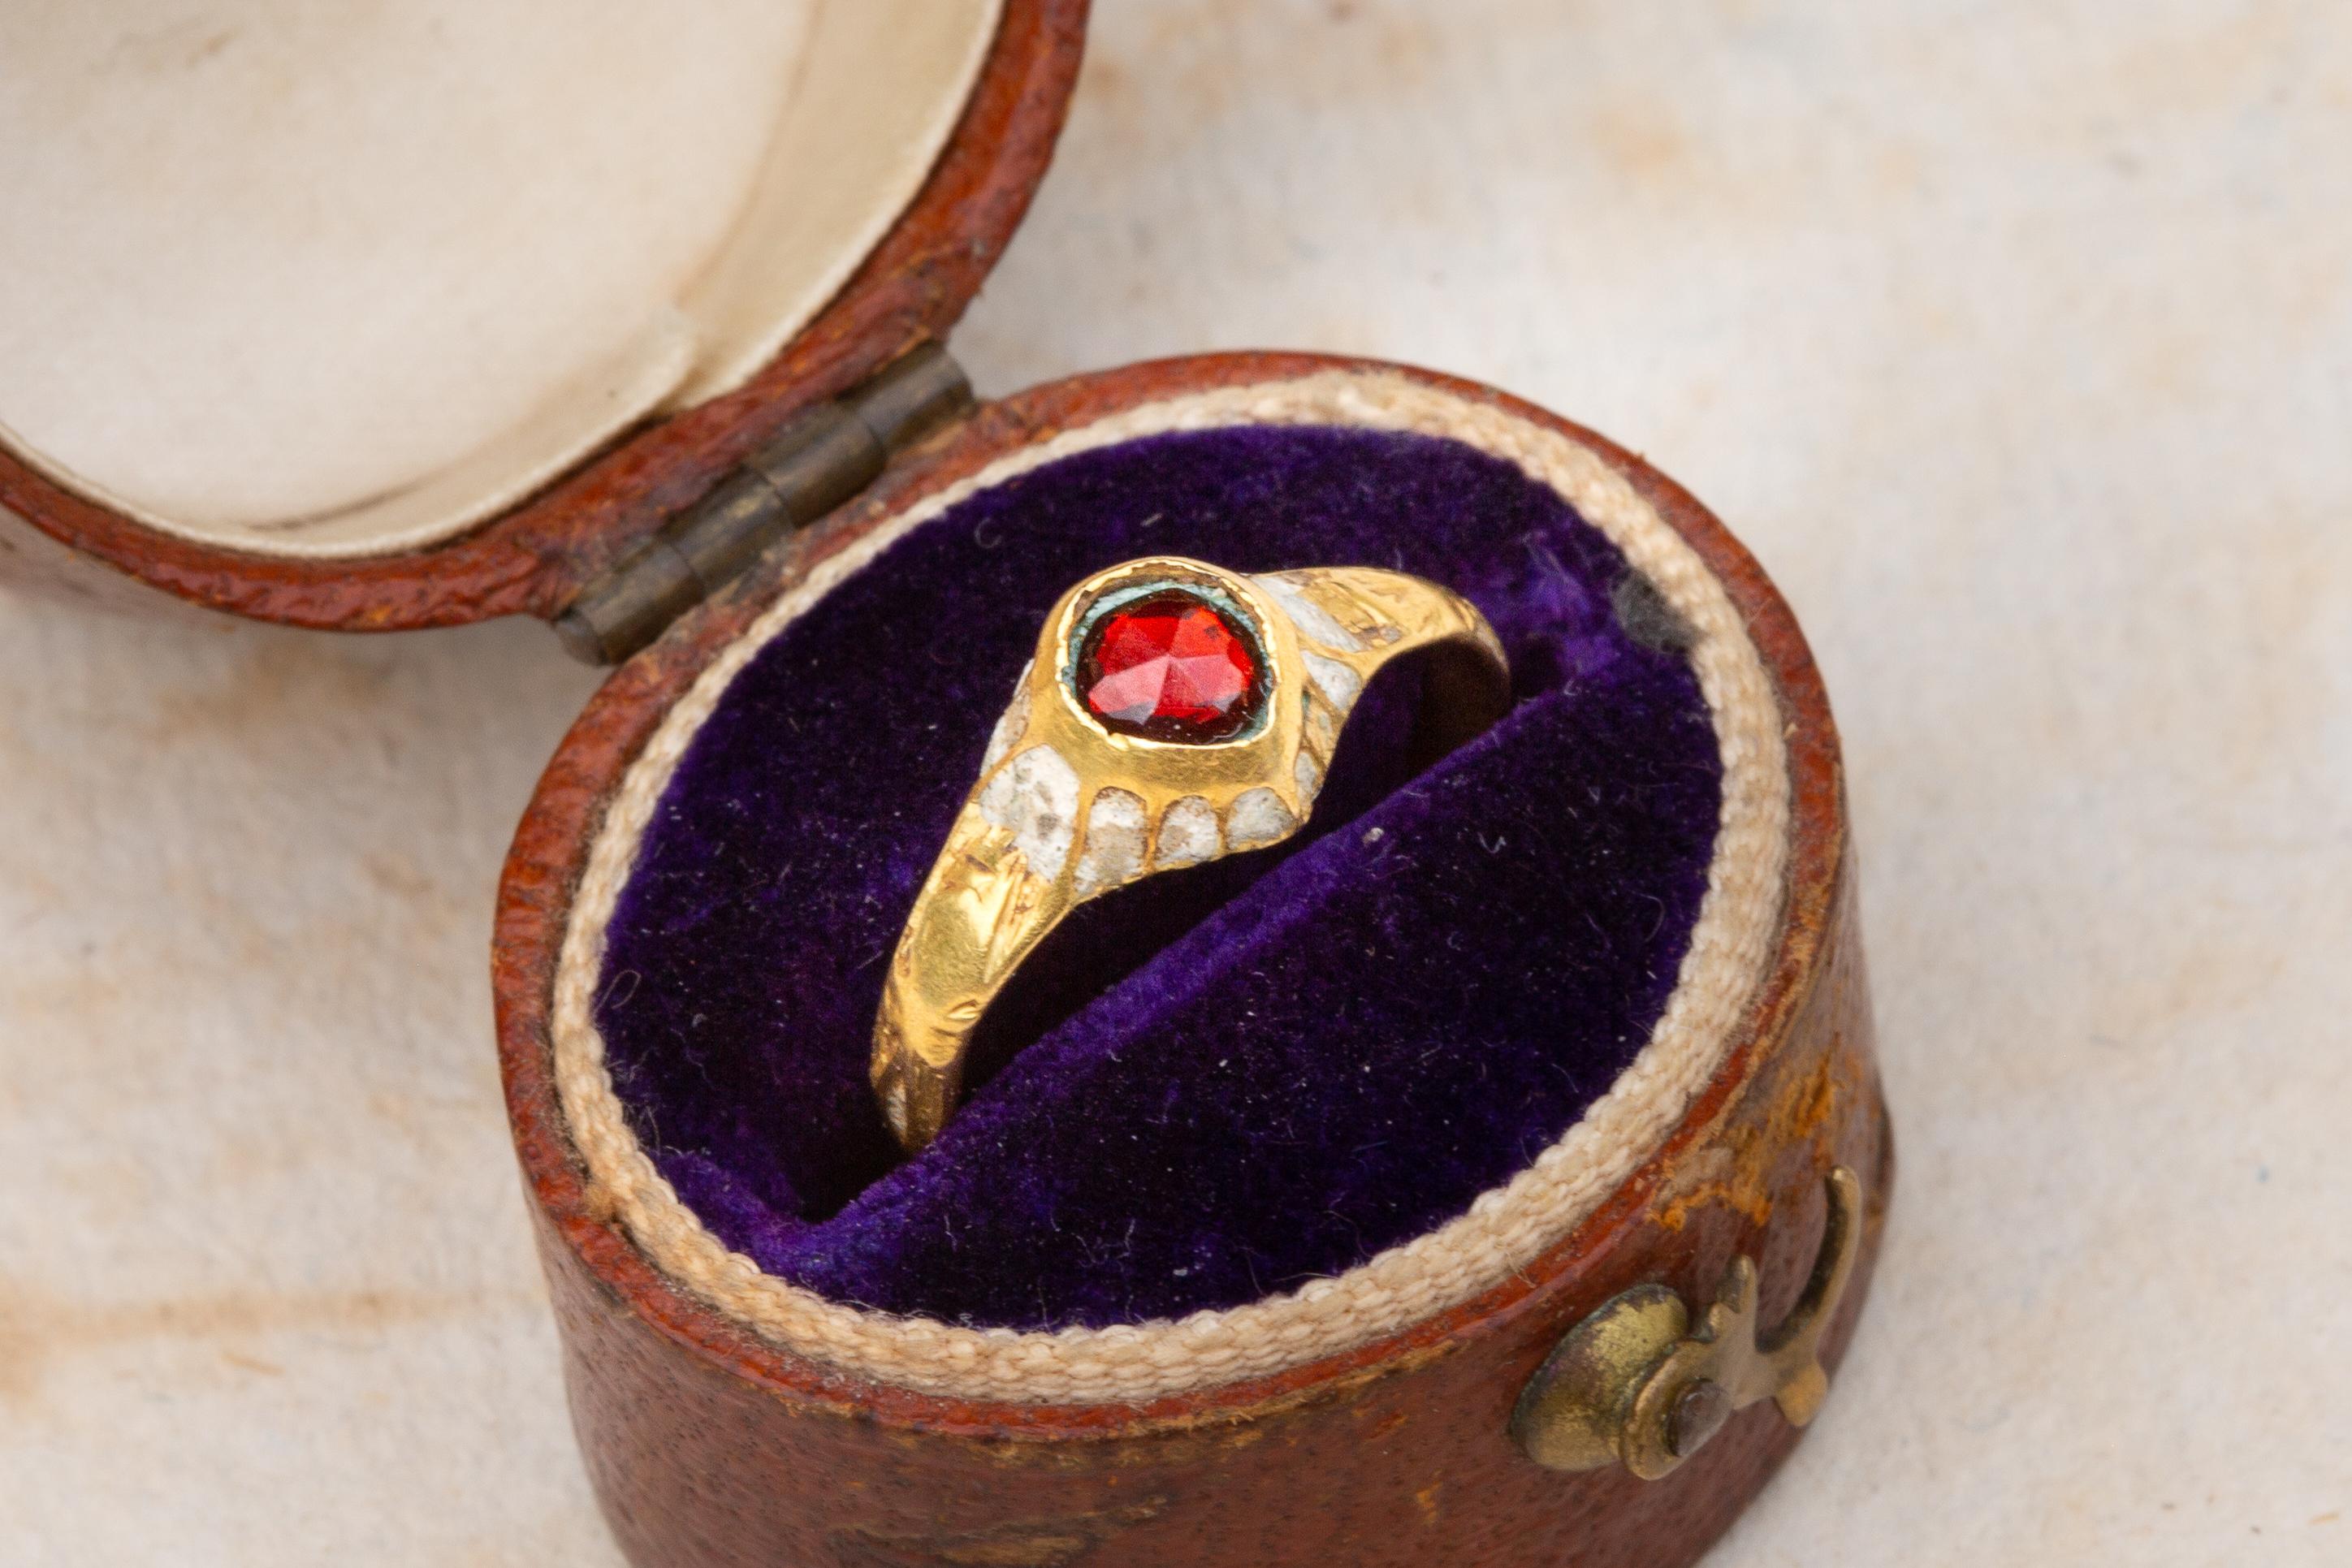 A stunning and rare example of a European renaissance ring dating to circa 1600! It would have originally been worn by a young women of a wealthy and noble family. The tear-drop shaped bezel is encircled by multiple cuffs enamelled in white.